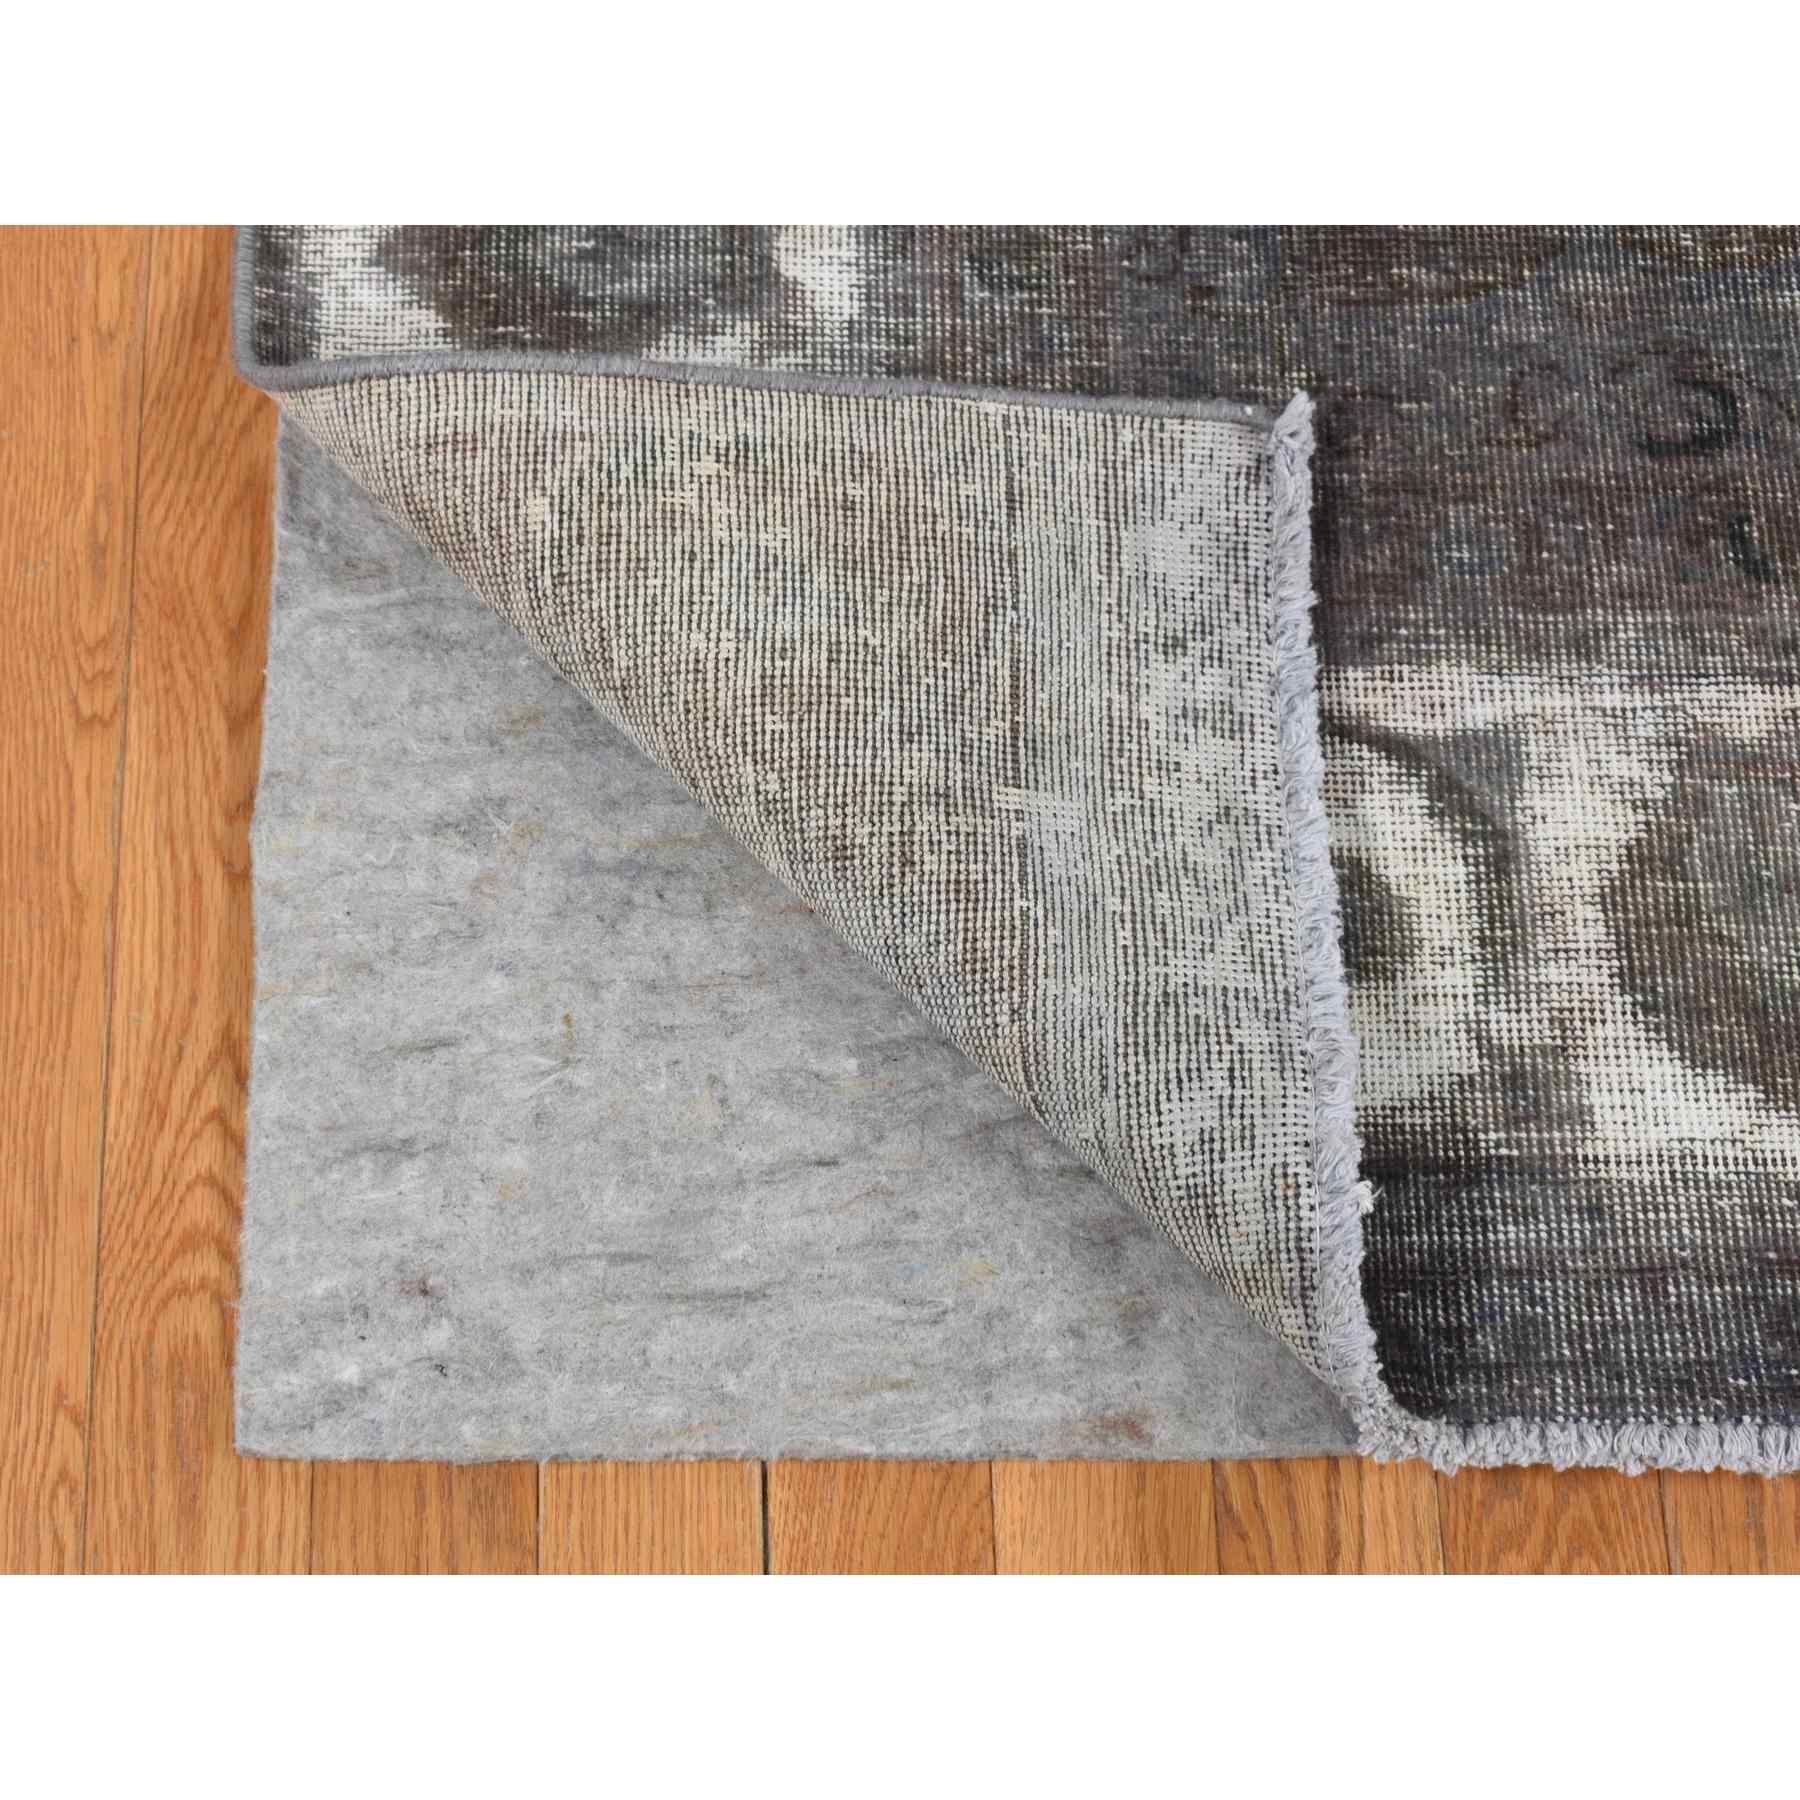 Overdyed-Vintage-Hand-Knotted-Rug-436080